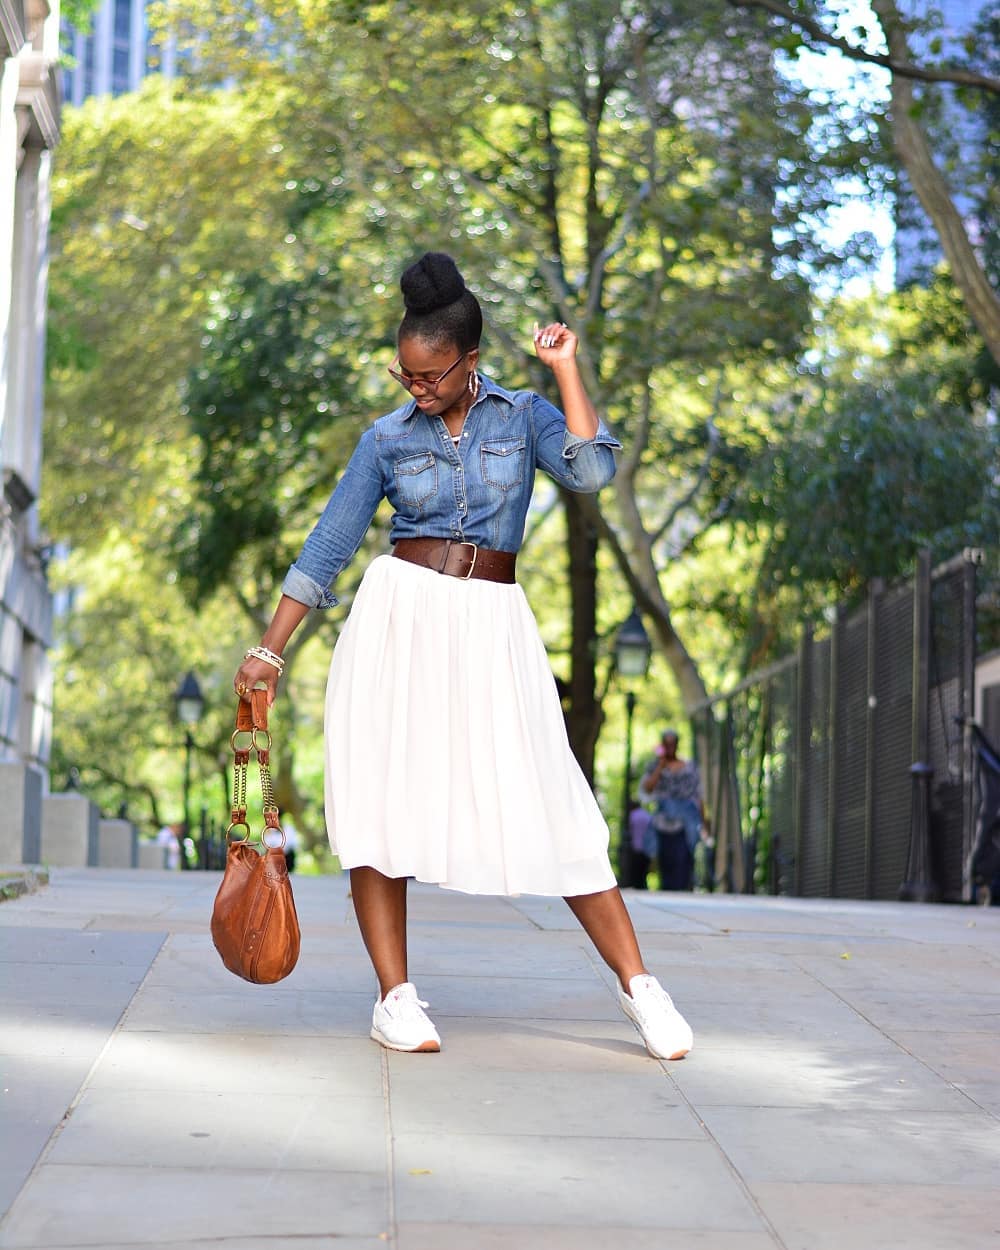 7 Jean Skirt Outfits That Are Trendy as They Are Timeless | Vogue